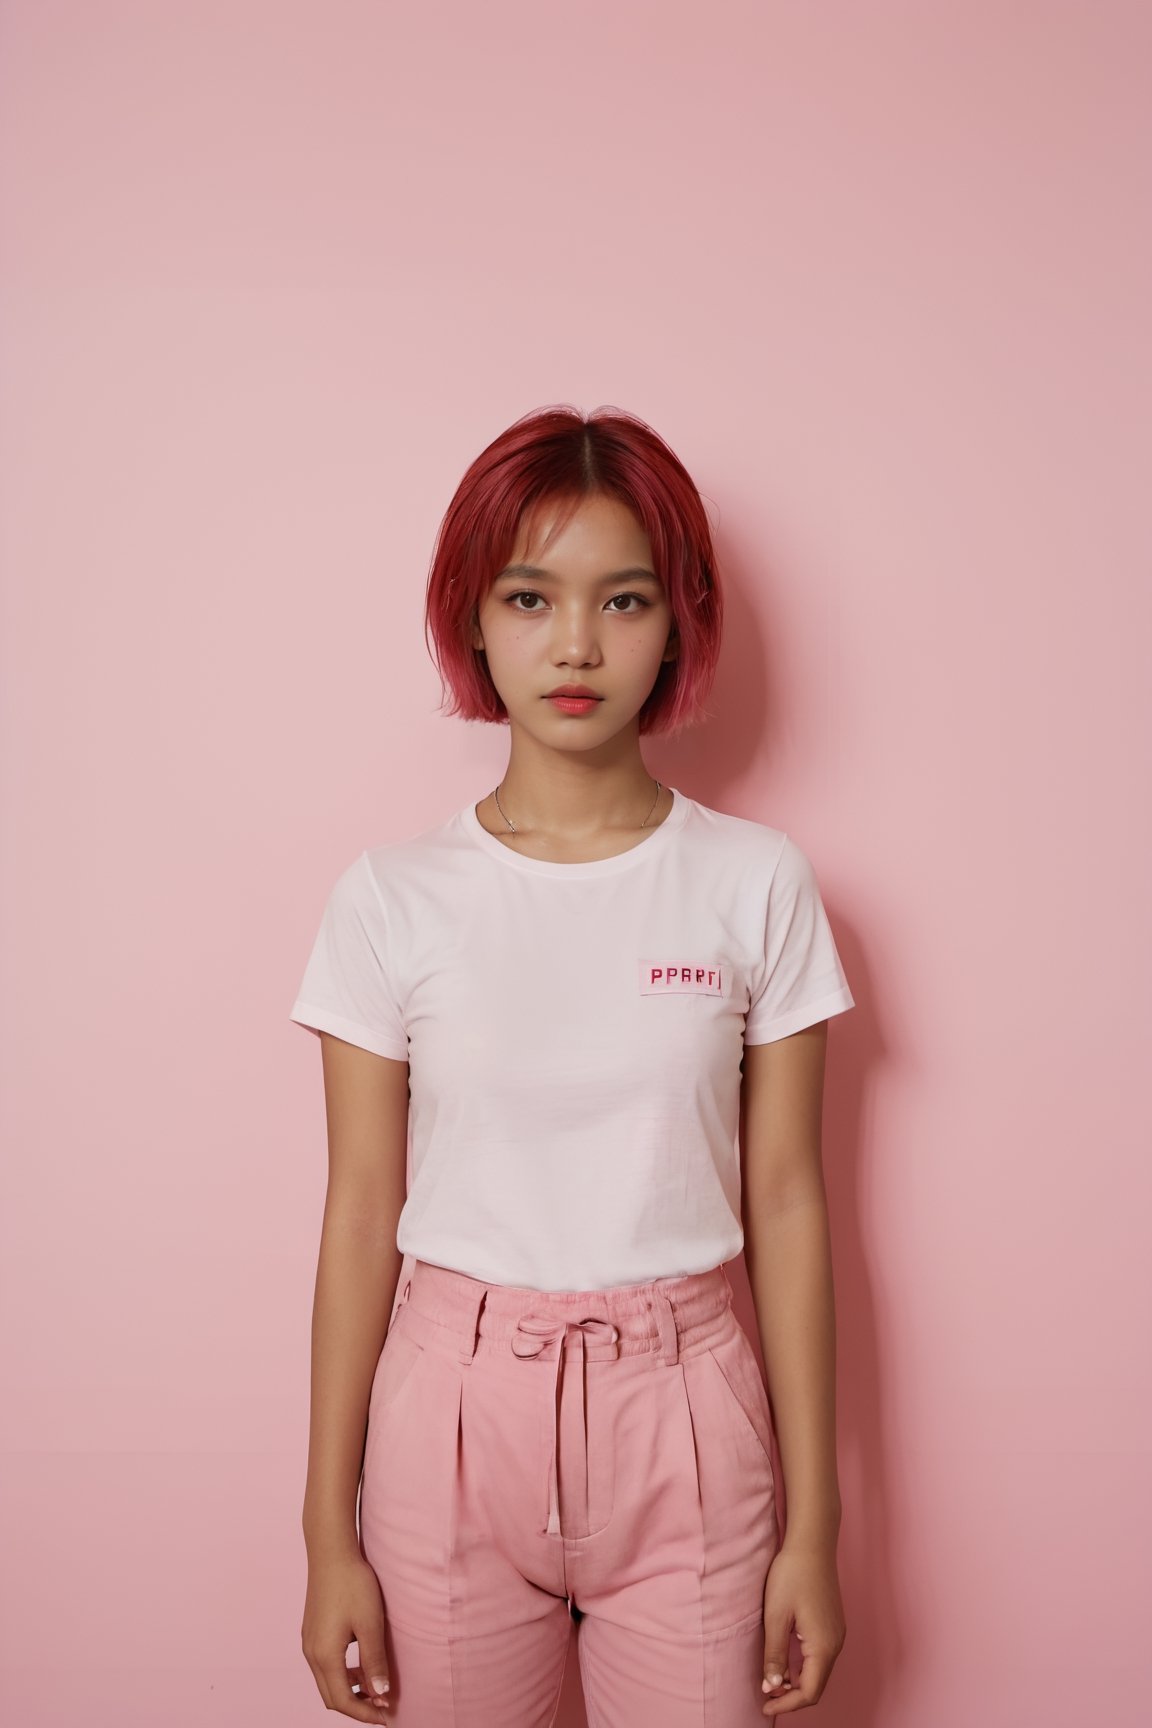 A full body portrait,  hyperdetailed indonesian photography,  by Elizabeth Polunin,  pink colour short hair young indonesian schoolgirl, brooklyn, looking straight to camera,  sweaty, olya bossak, nepal, very accurate photo,  suspiria, pink wall backgroung, white t-shirt with pink pants 